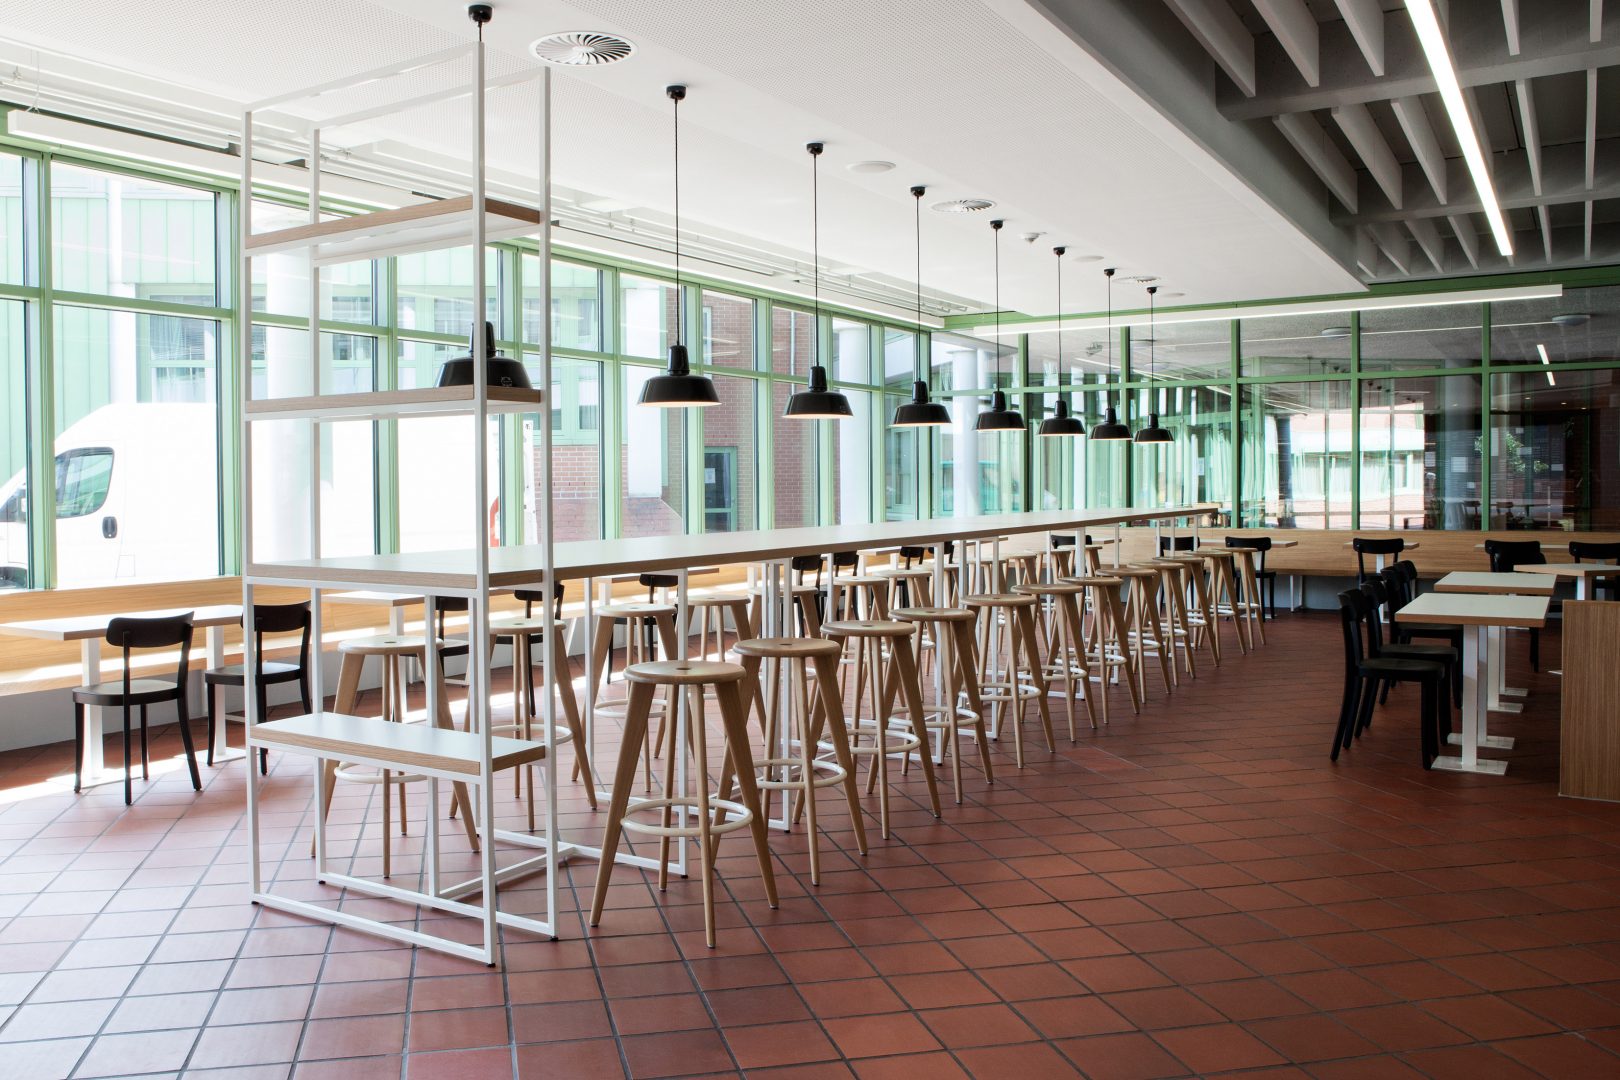 Long board in the school canteen of the Friedrichshafen vocational school centre designed by atelier 522.